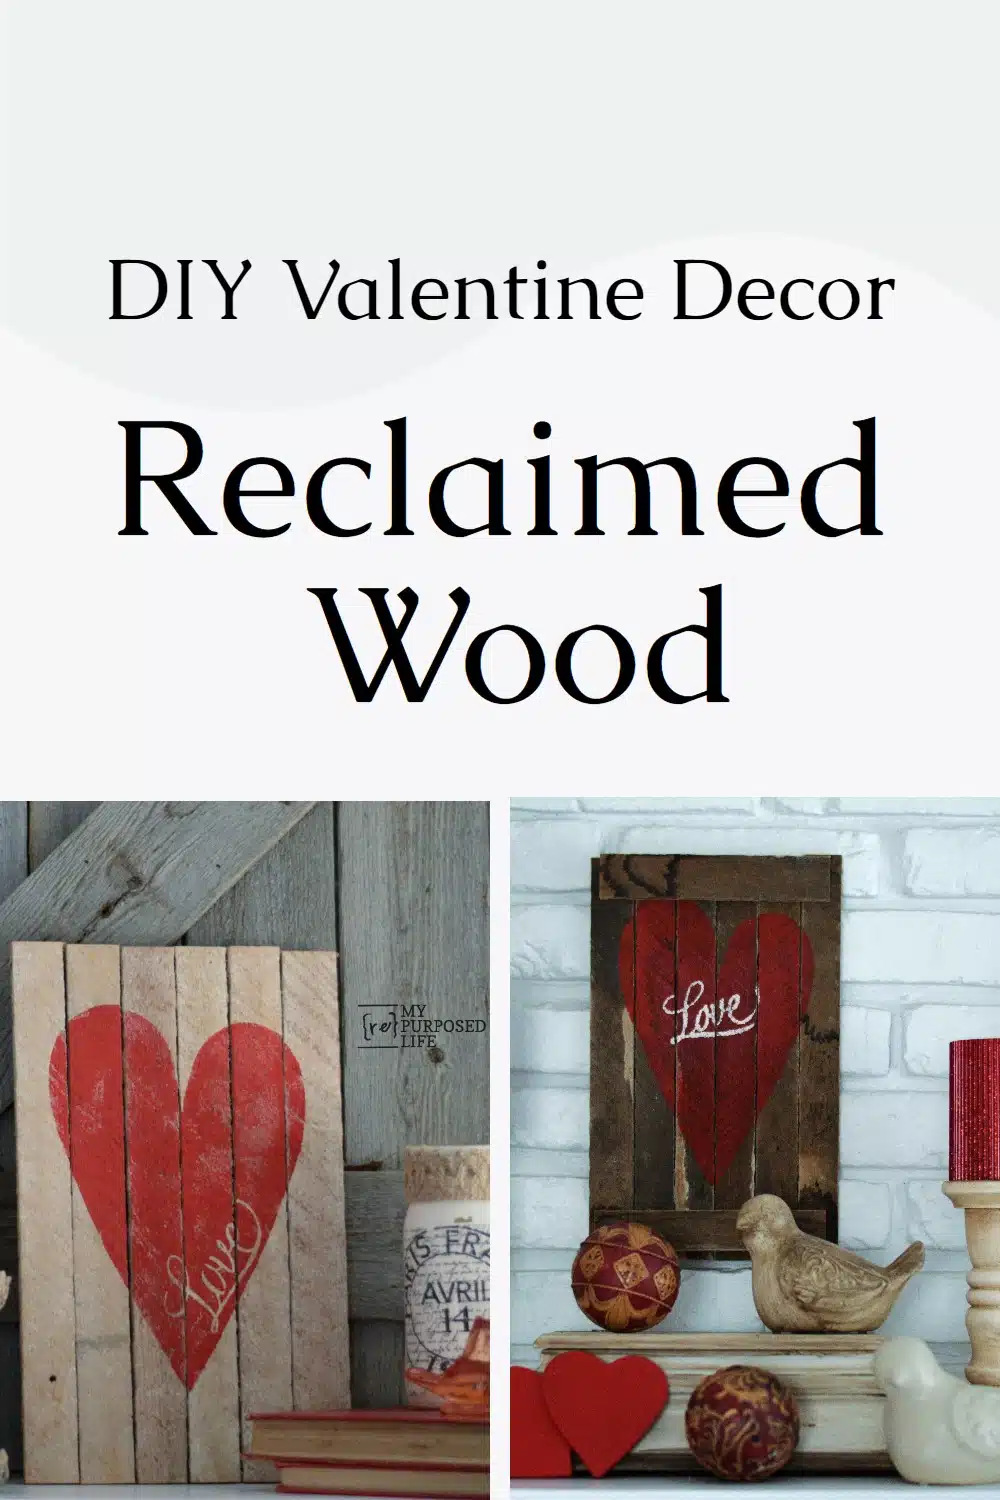 Easy Valentines day diy decor to make. This easy project is a great last minute valentine craft to make out of reclaimed wood. Love, red heart decor. #MyRepurposedLife #diy #Valentines #decor #rustic via @repurposedlife